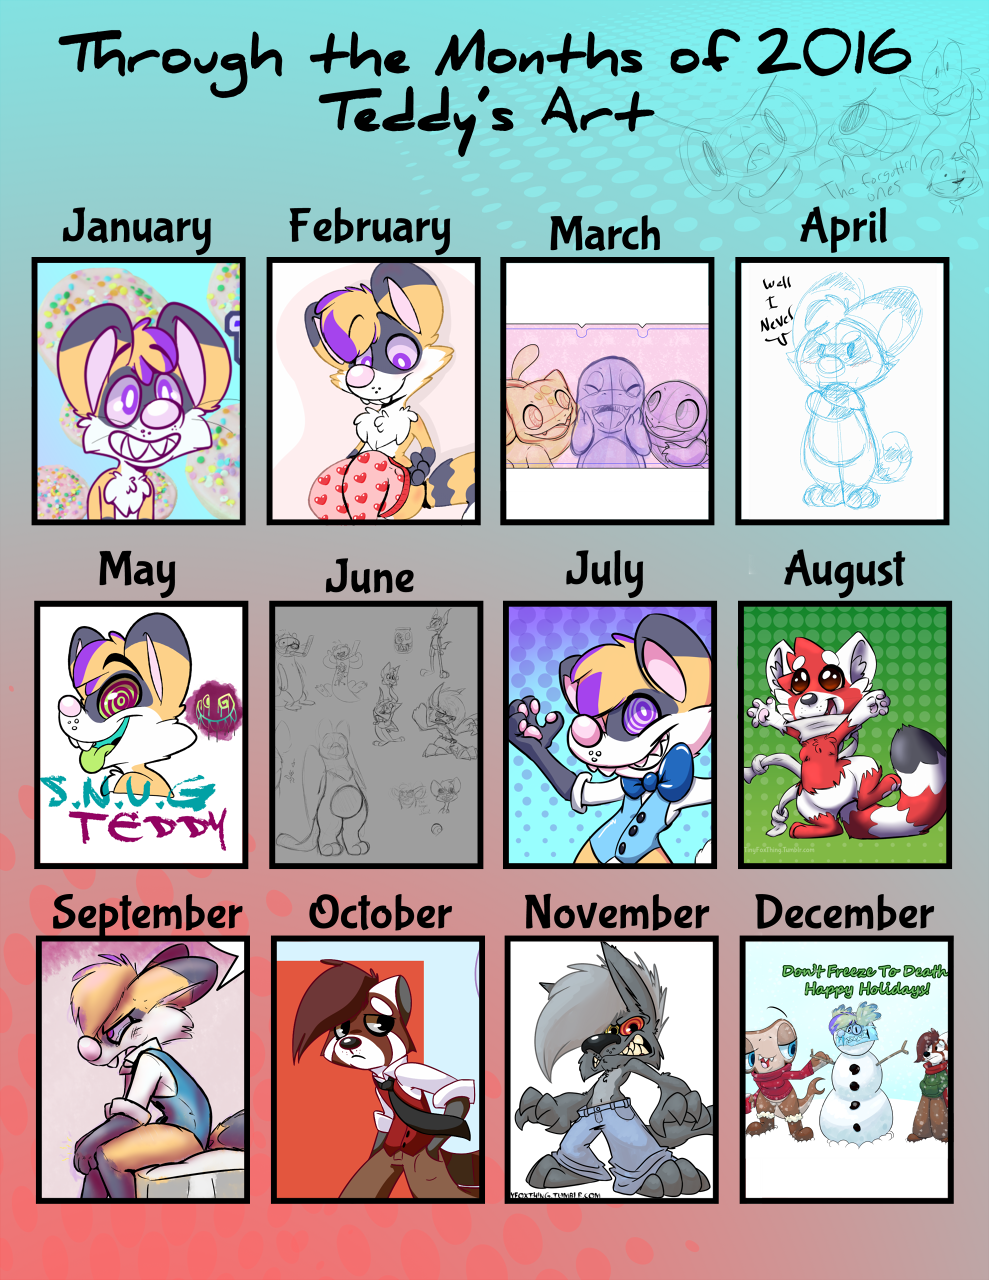 Through the Months with TeddyFoxcoon